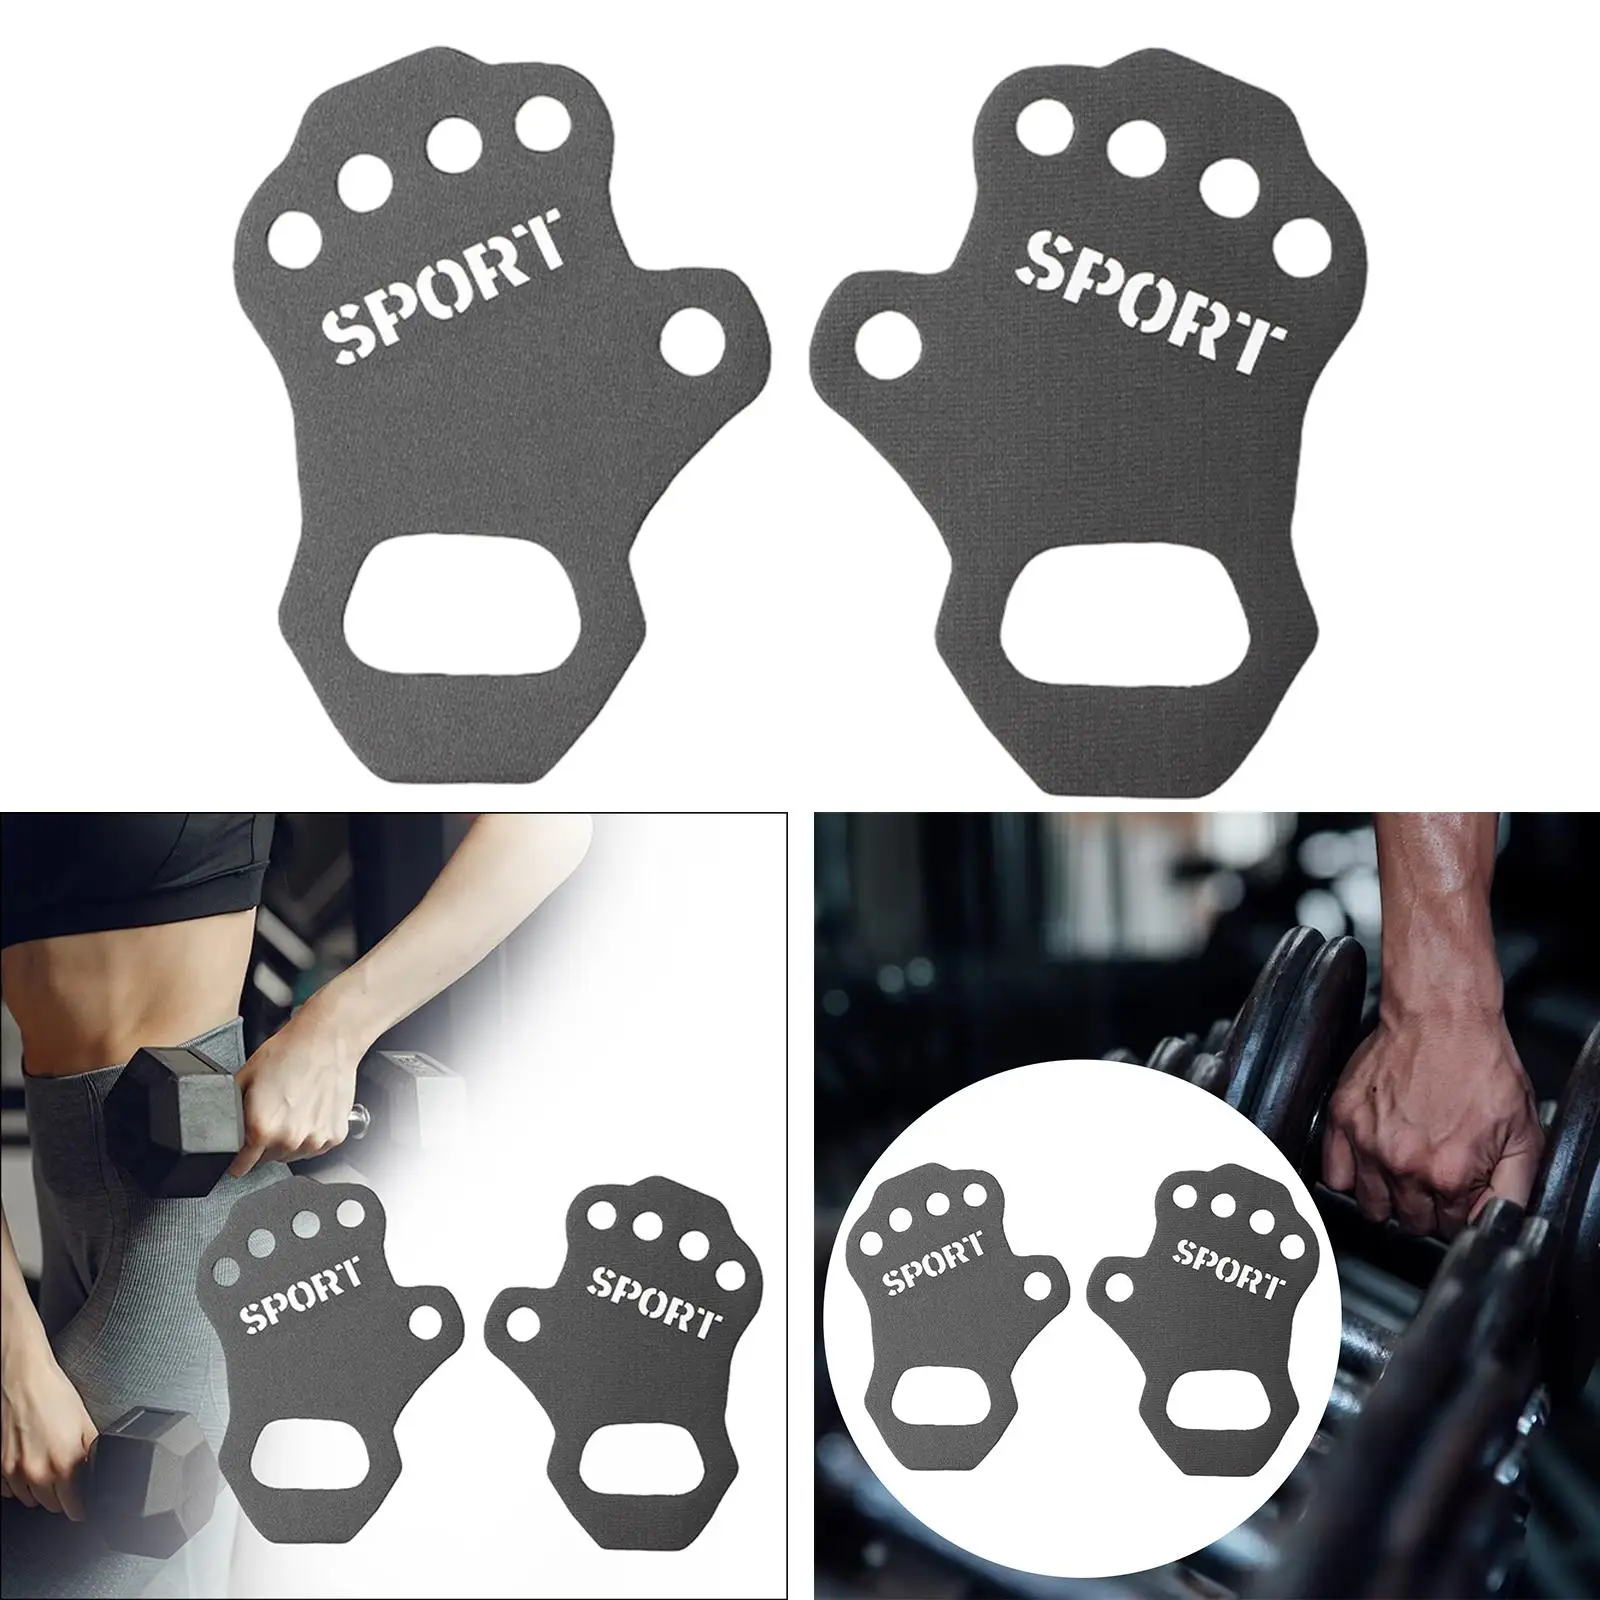 Workout Gloves Hand Grips Comfort Fitness Gloves Durable Pads Glove for Men